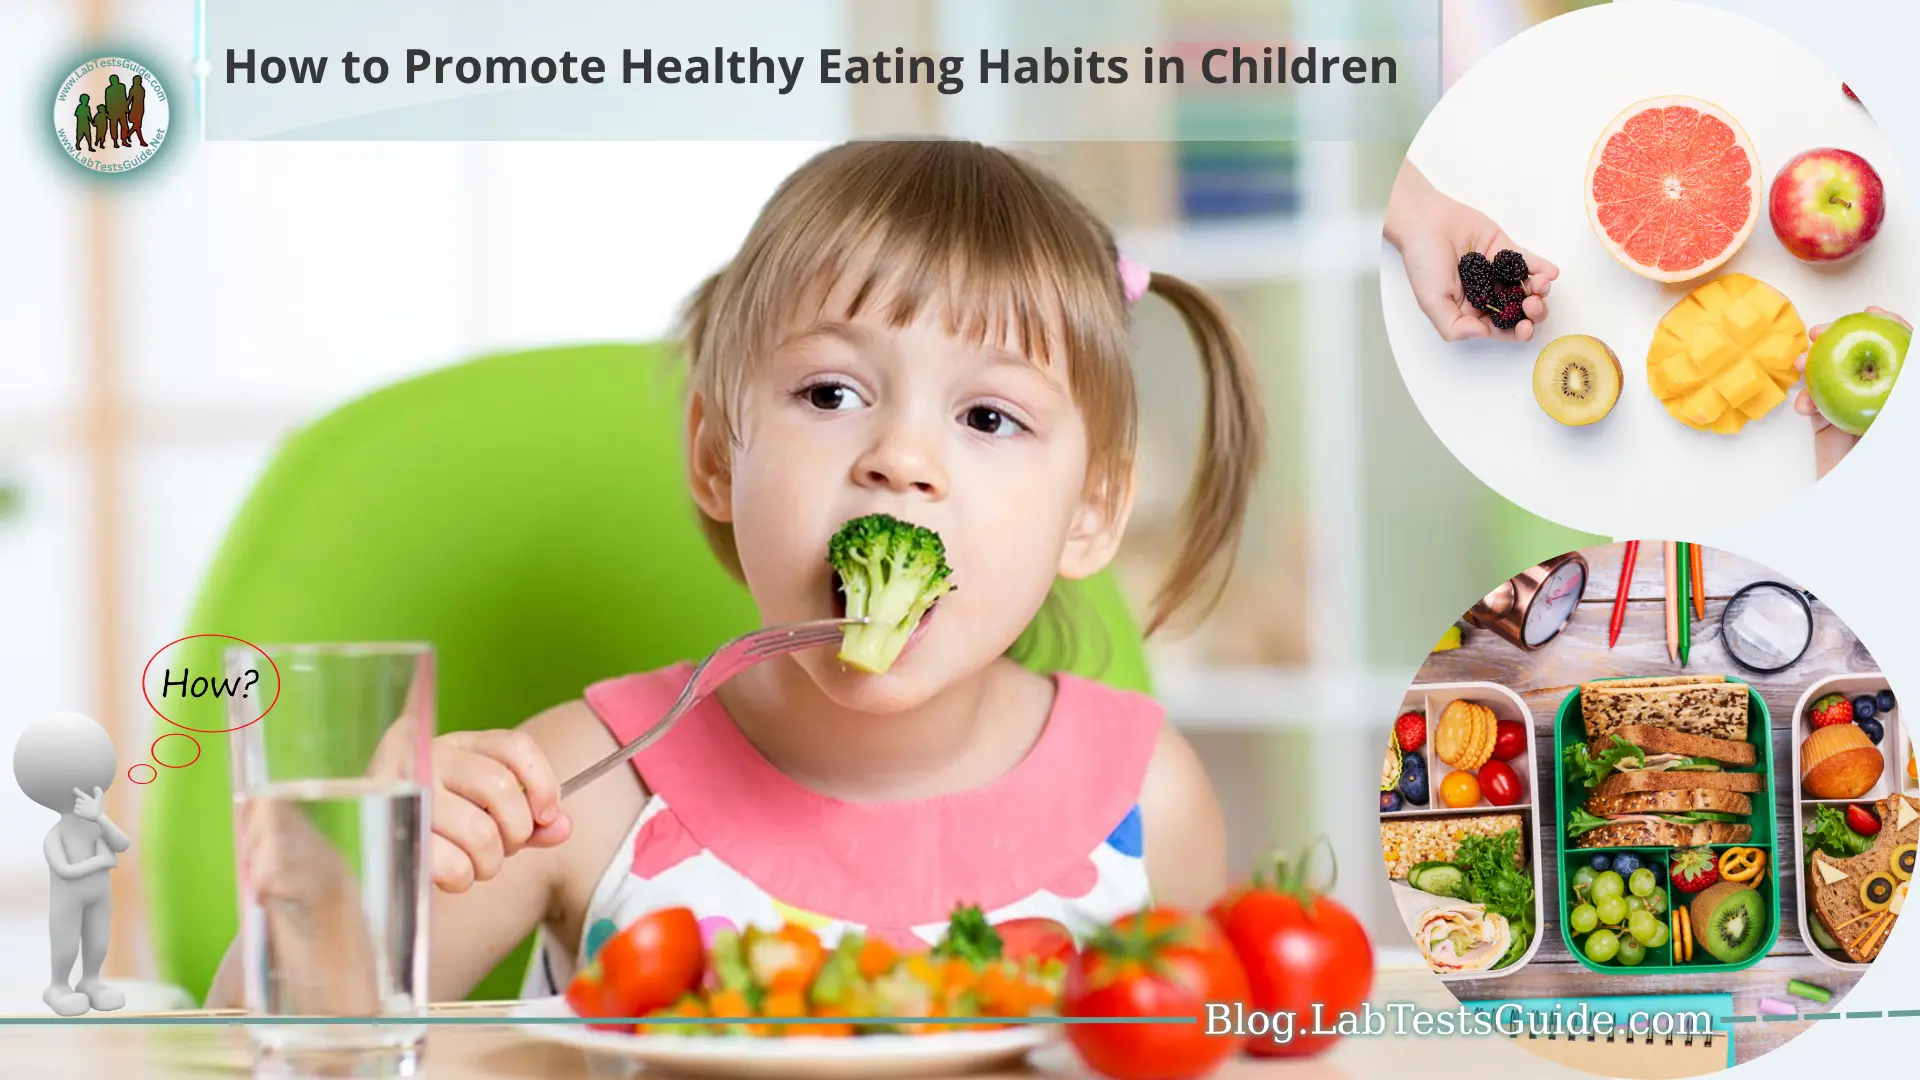 How to Promote Healthy Eating Habits in Children - Lab Tests Guide Blog